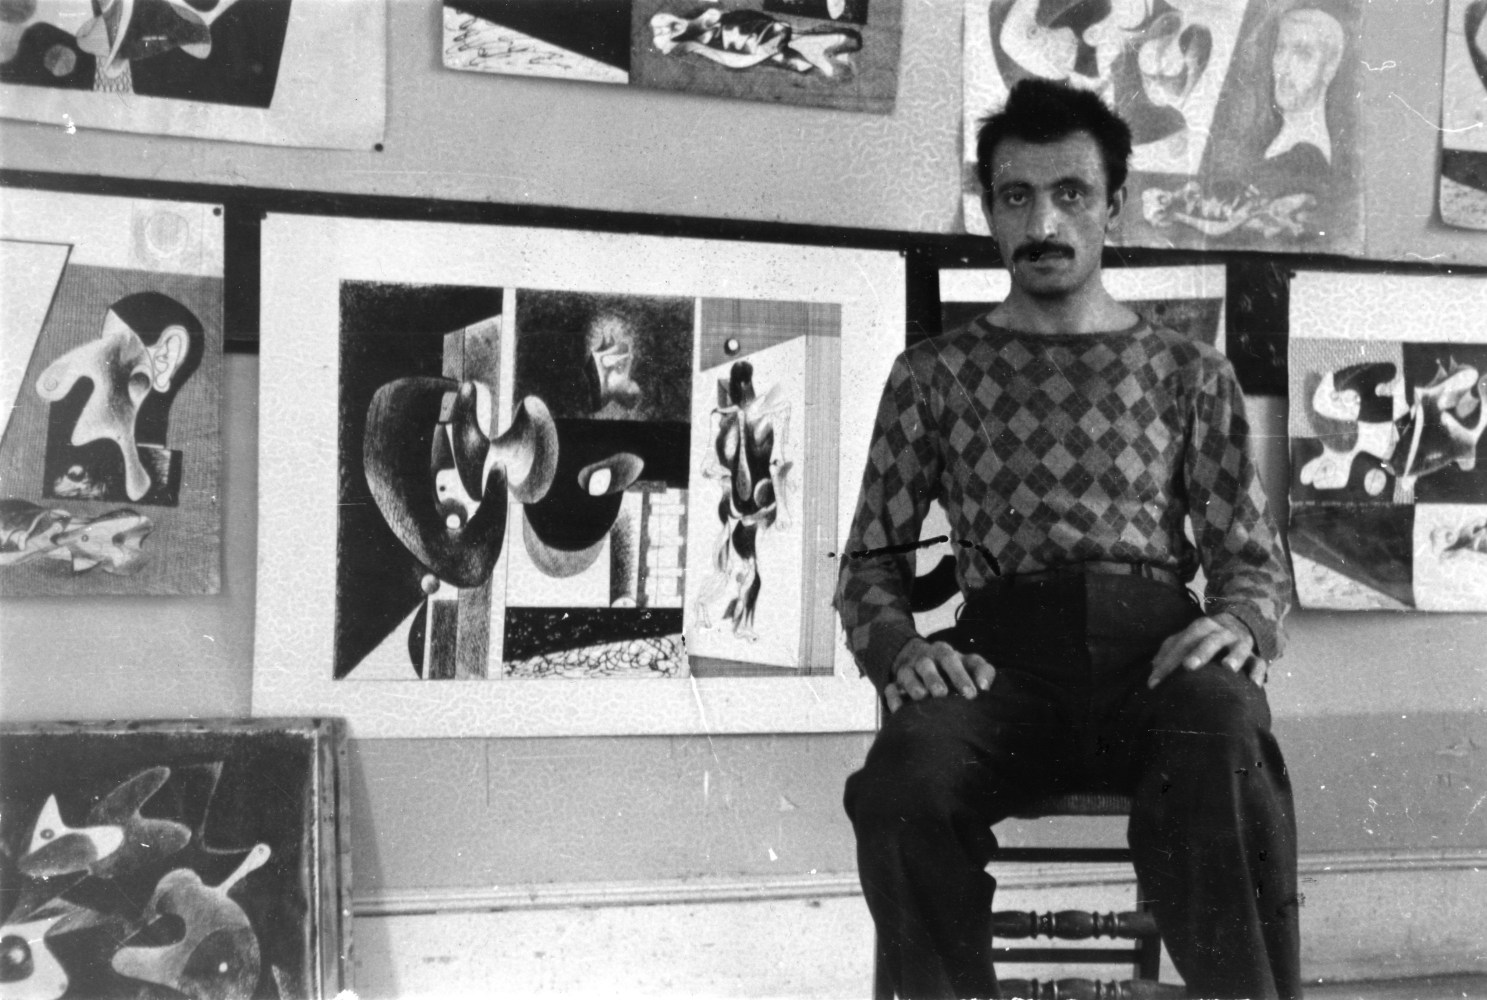 Black-and-white photograph of a man in a patterned sweater seated before a wall on which eight abstract ink drawings are hung